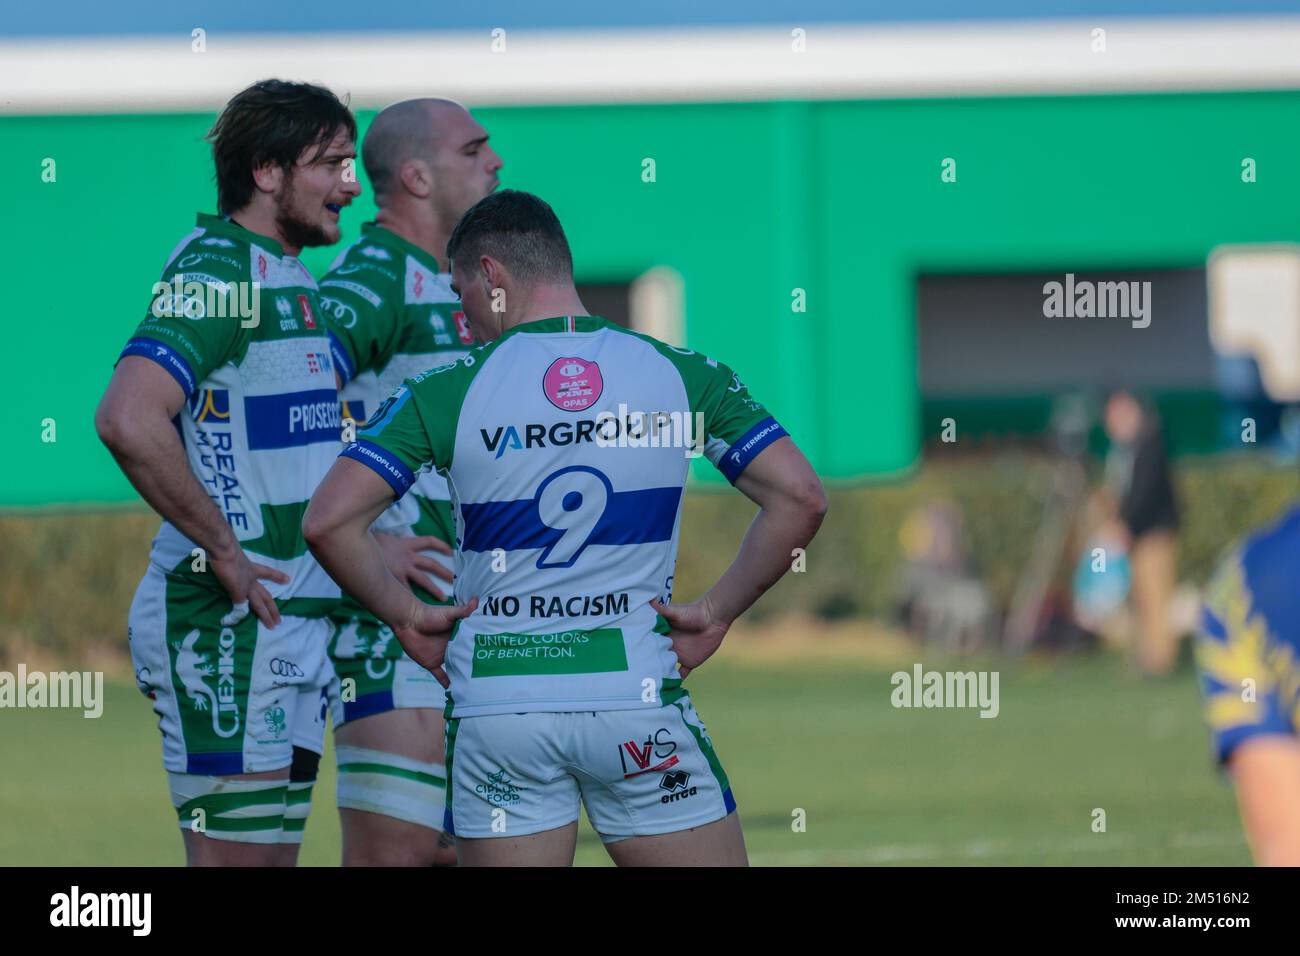 Monigo stadium, Treviso, Italy, December 24, 2022, Alessandro Garbisi  (Benetton Rugby) during Benetton Rugby vs Zebre Rugby Club - United Rugby  Championship match Credit: Live Media Publishing Group/Alamy Live News  Stock Photo - Alamy